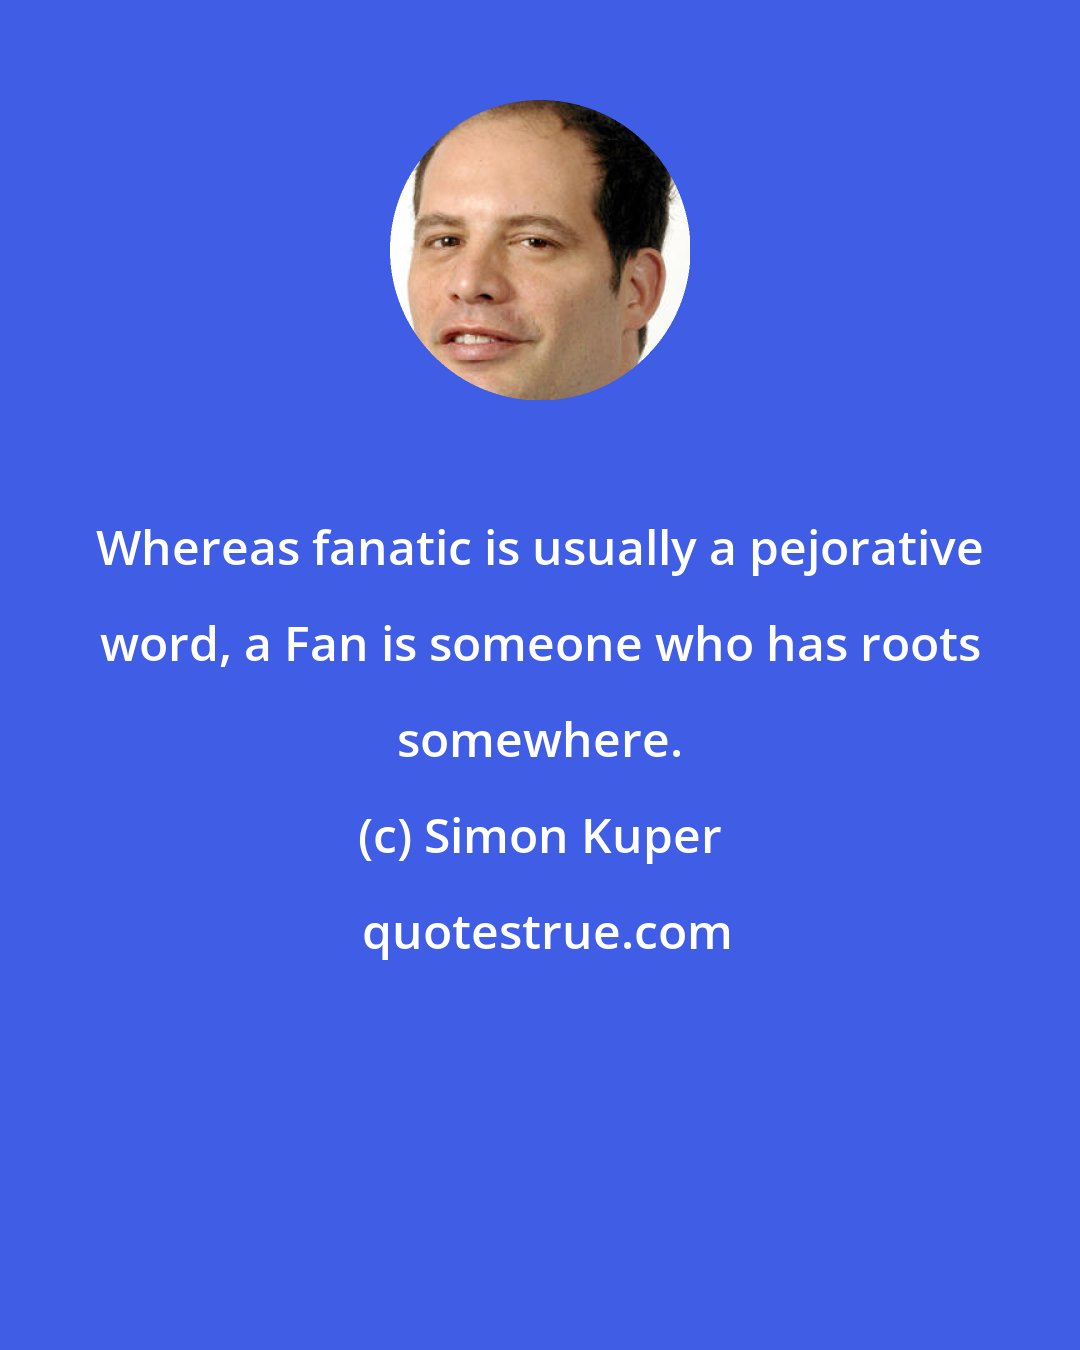 Simon Kuper: Whereas fanatic is usually a pejorative word, a Fan is someone who has roots somewhere.